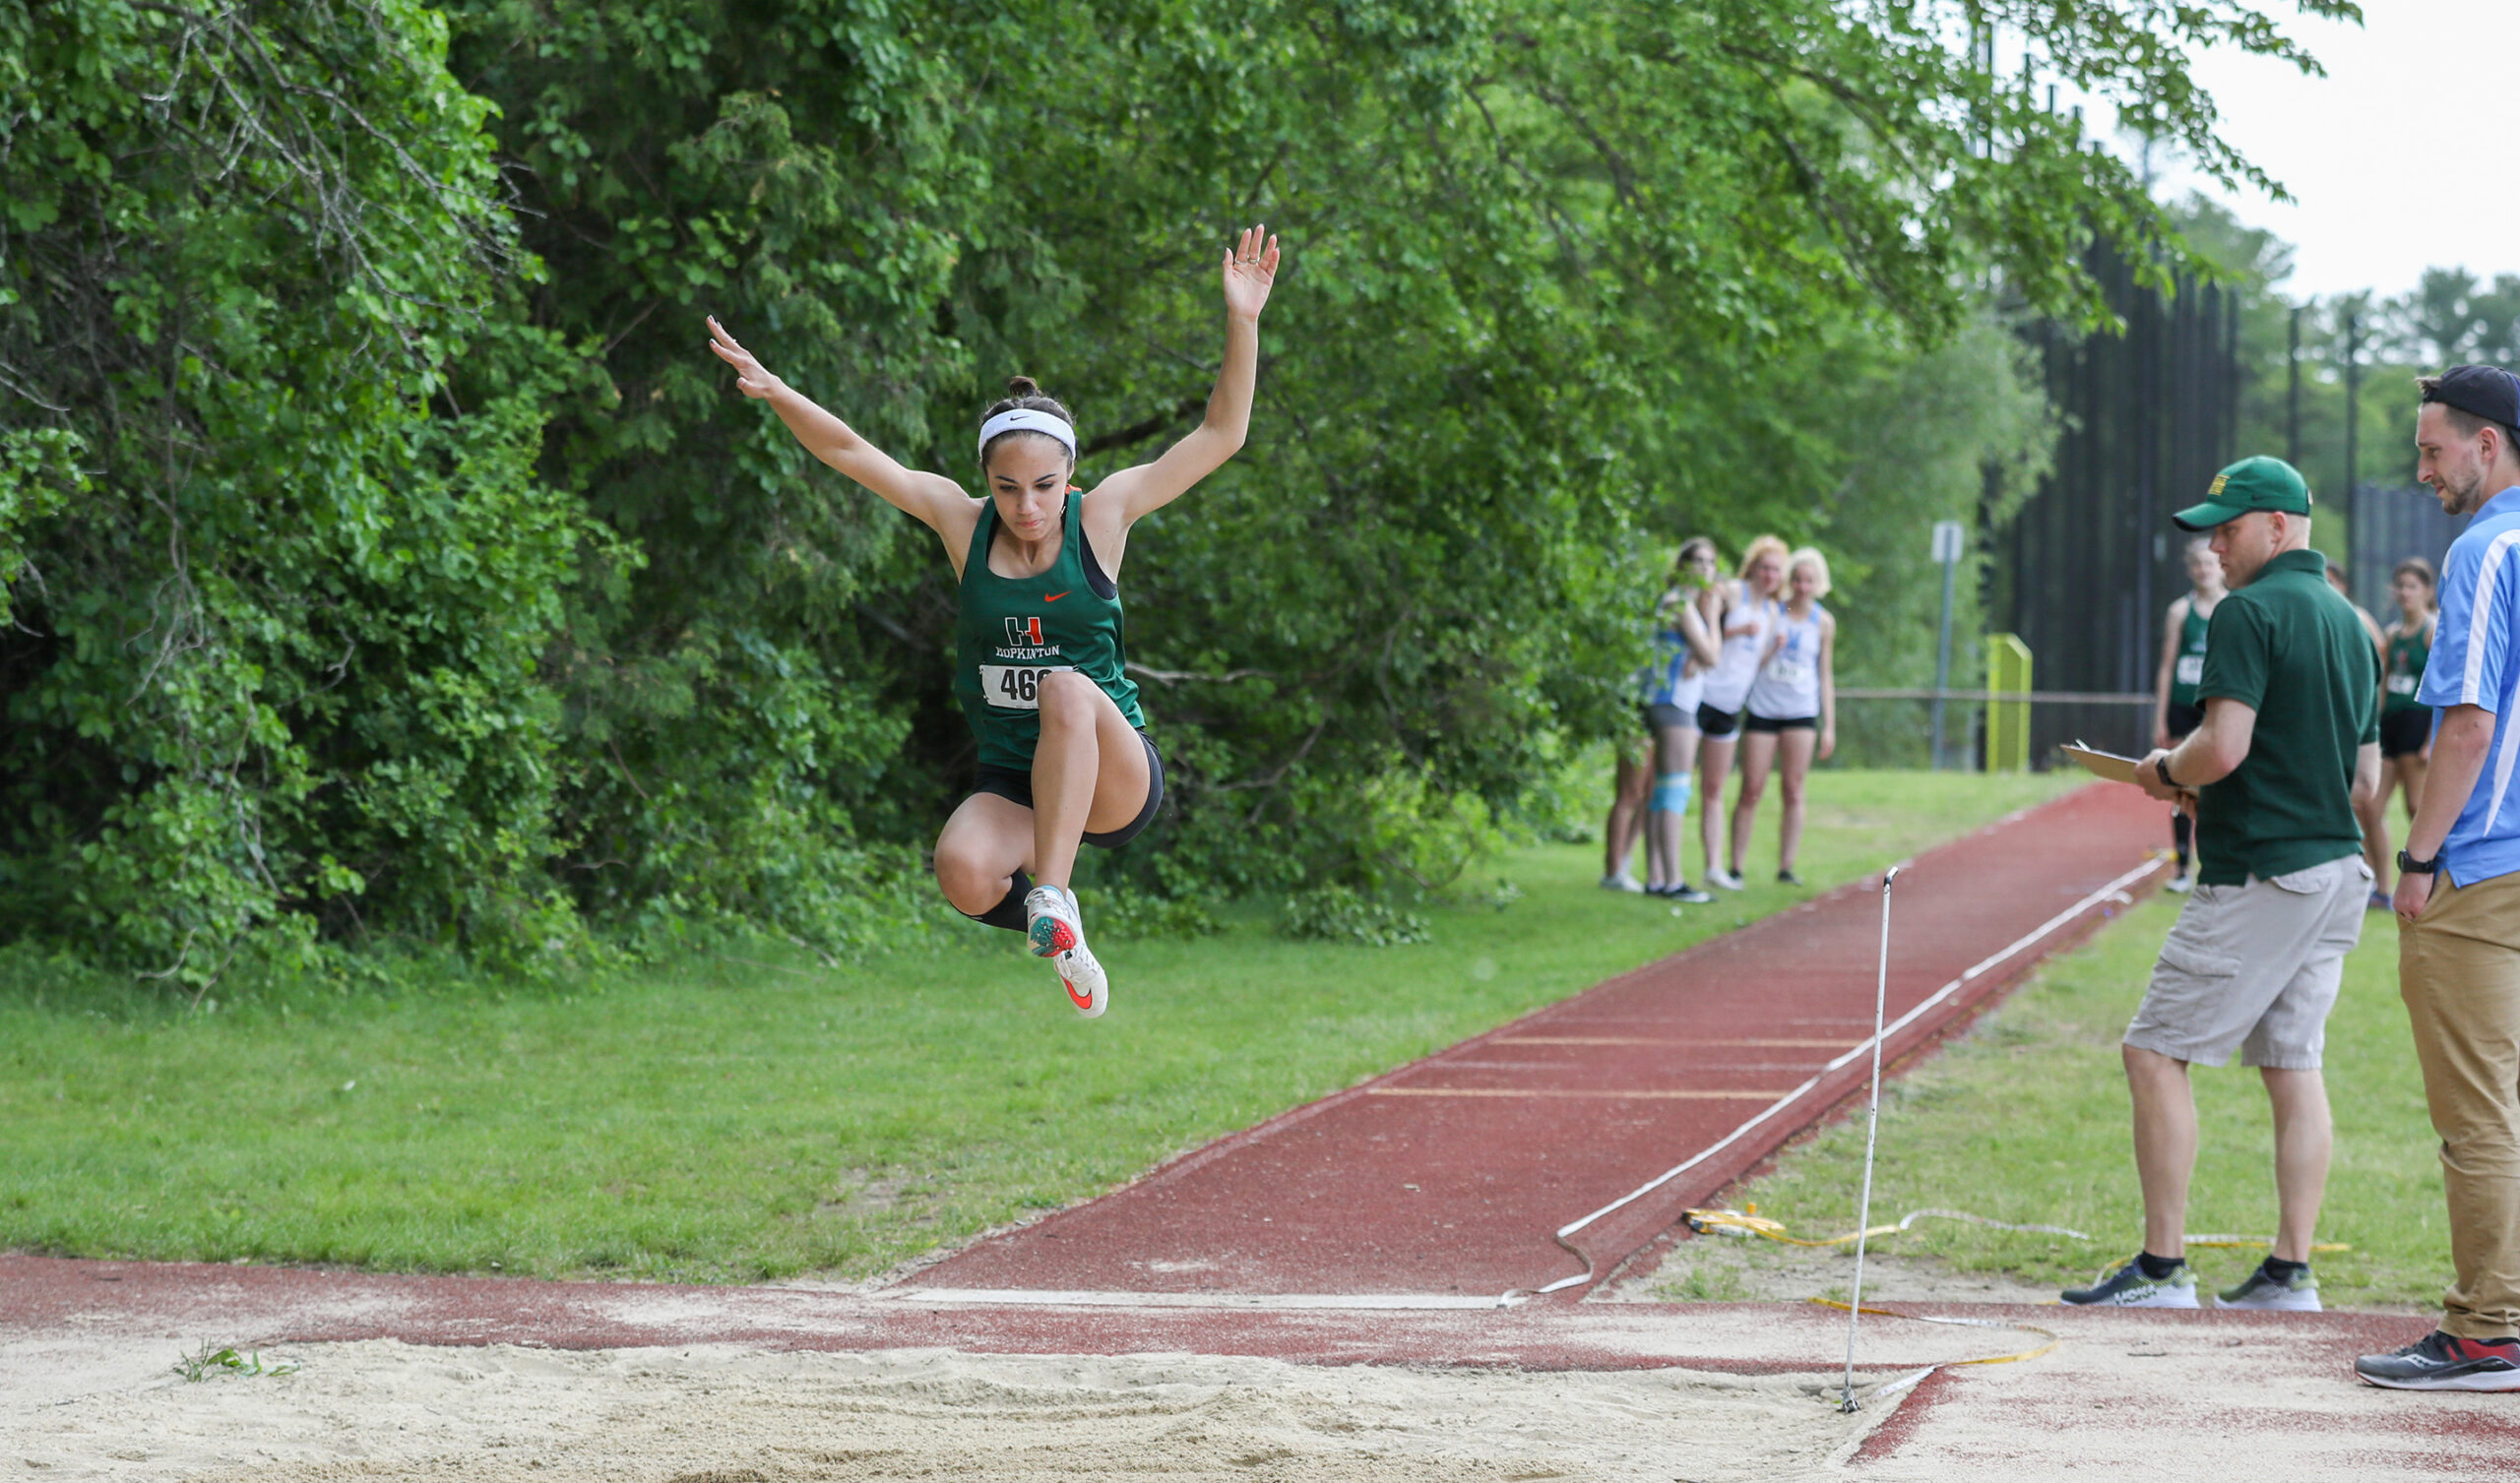 Hillers earn TVL honors for spring season, led by girls track MVP Tolson